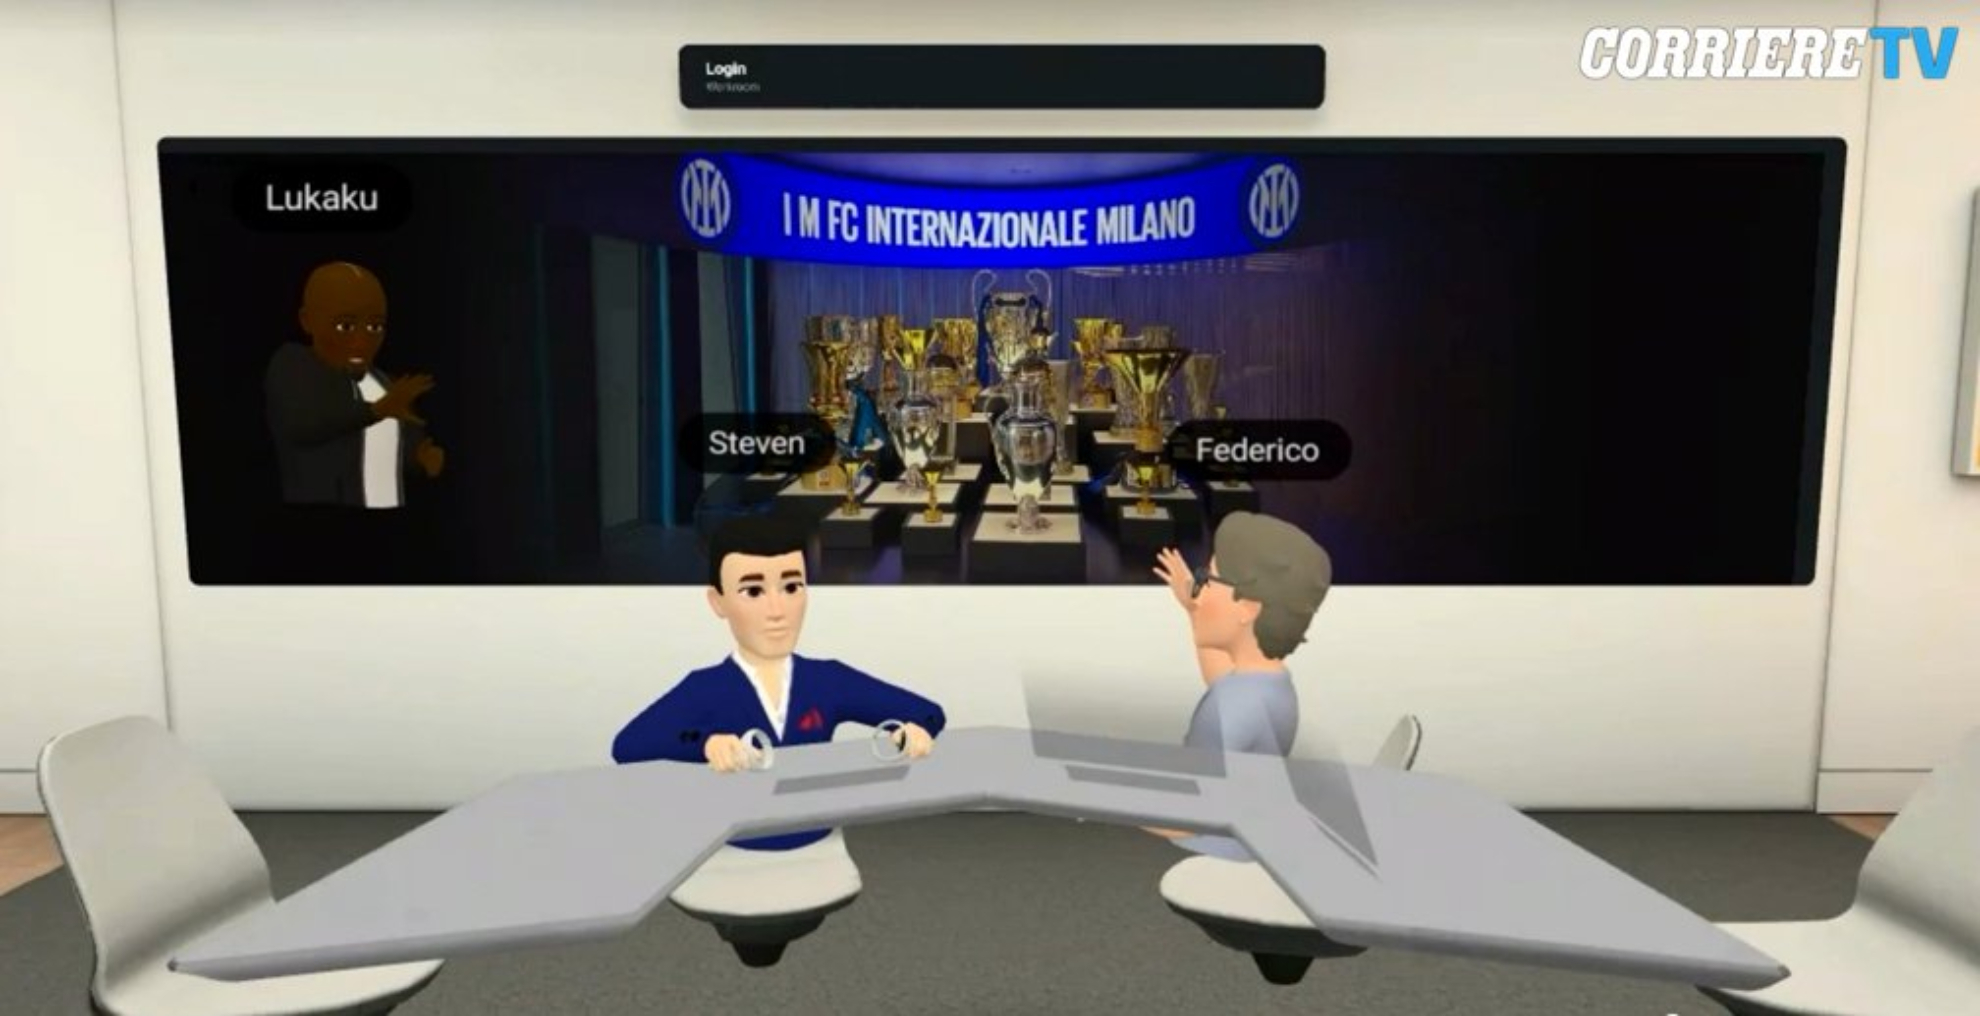 An interview in the metaverse with Inter president Zhang... and Lukaku appears!